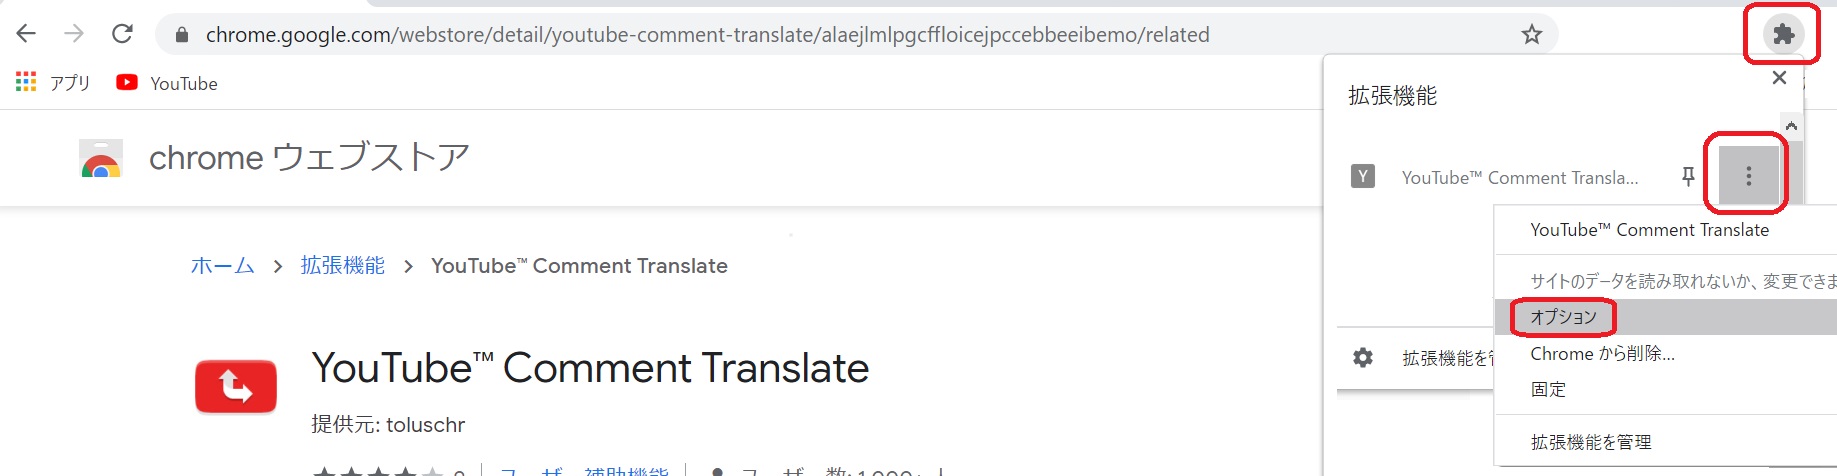 YouTube Comment Translateの設定